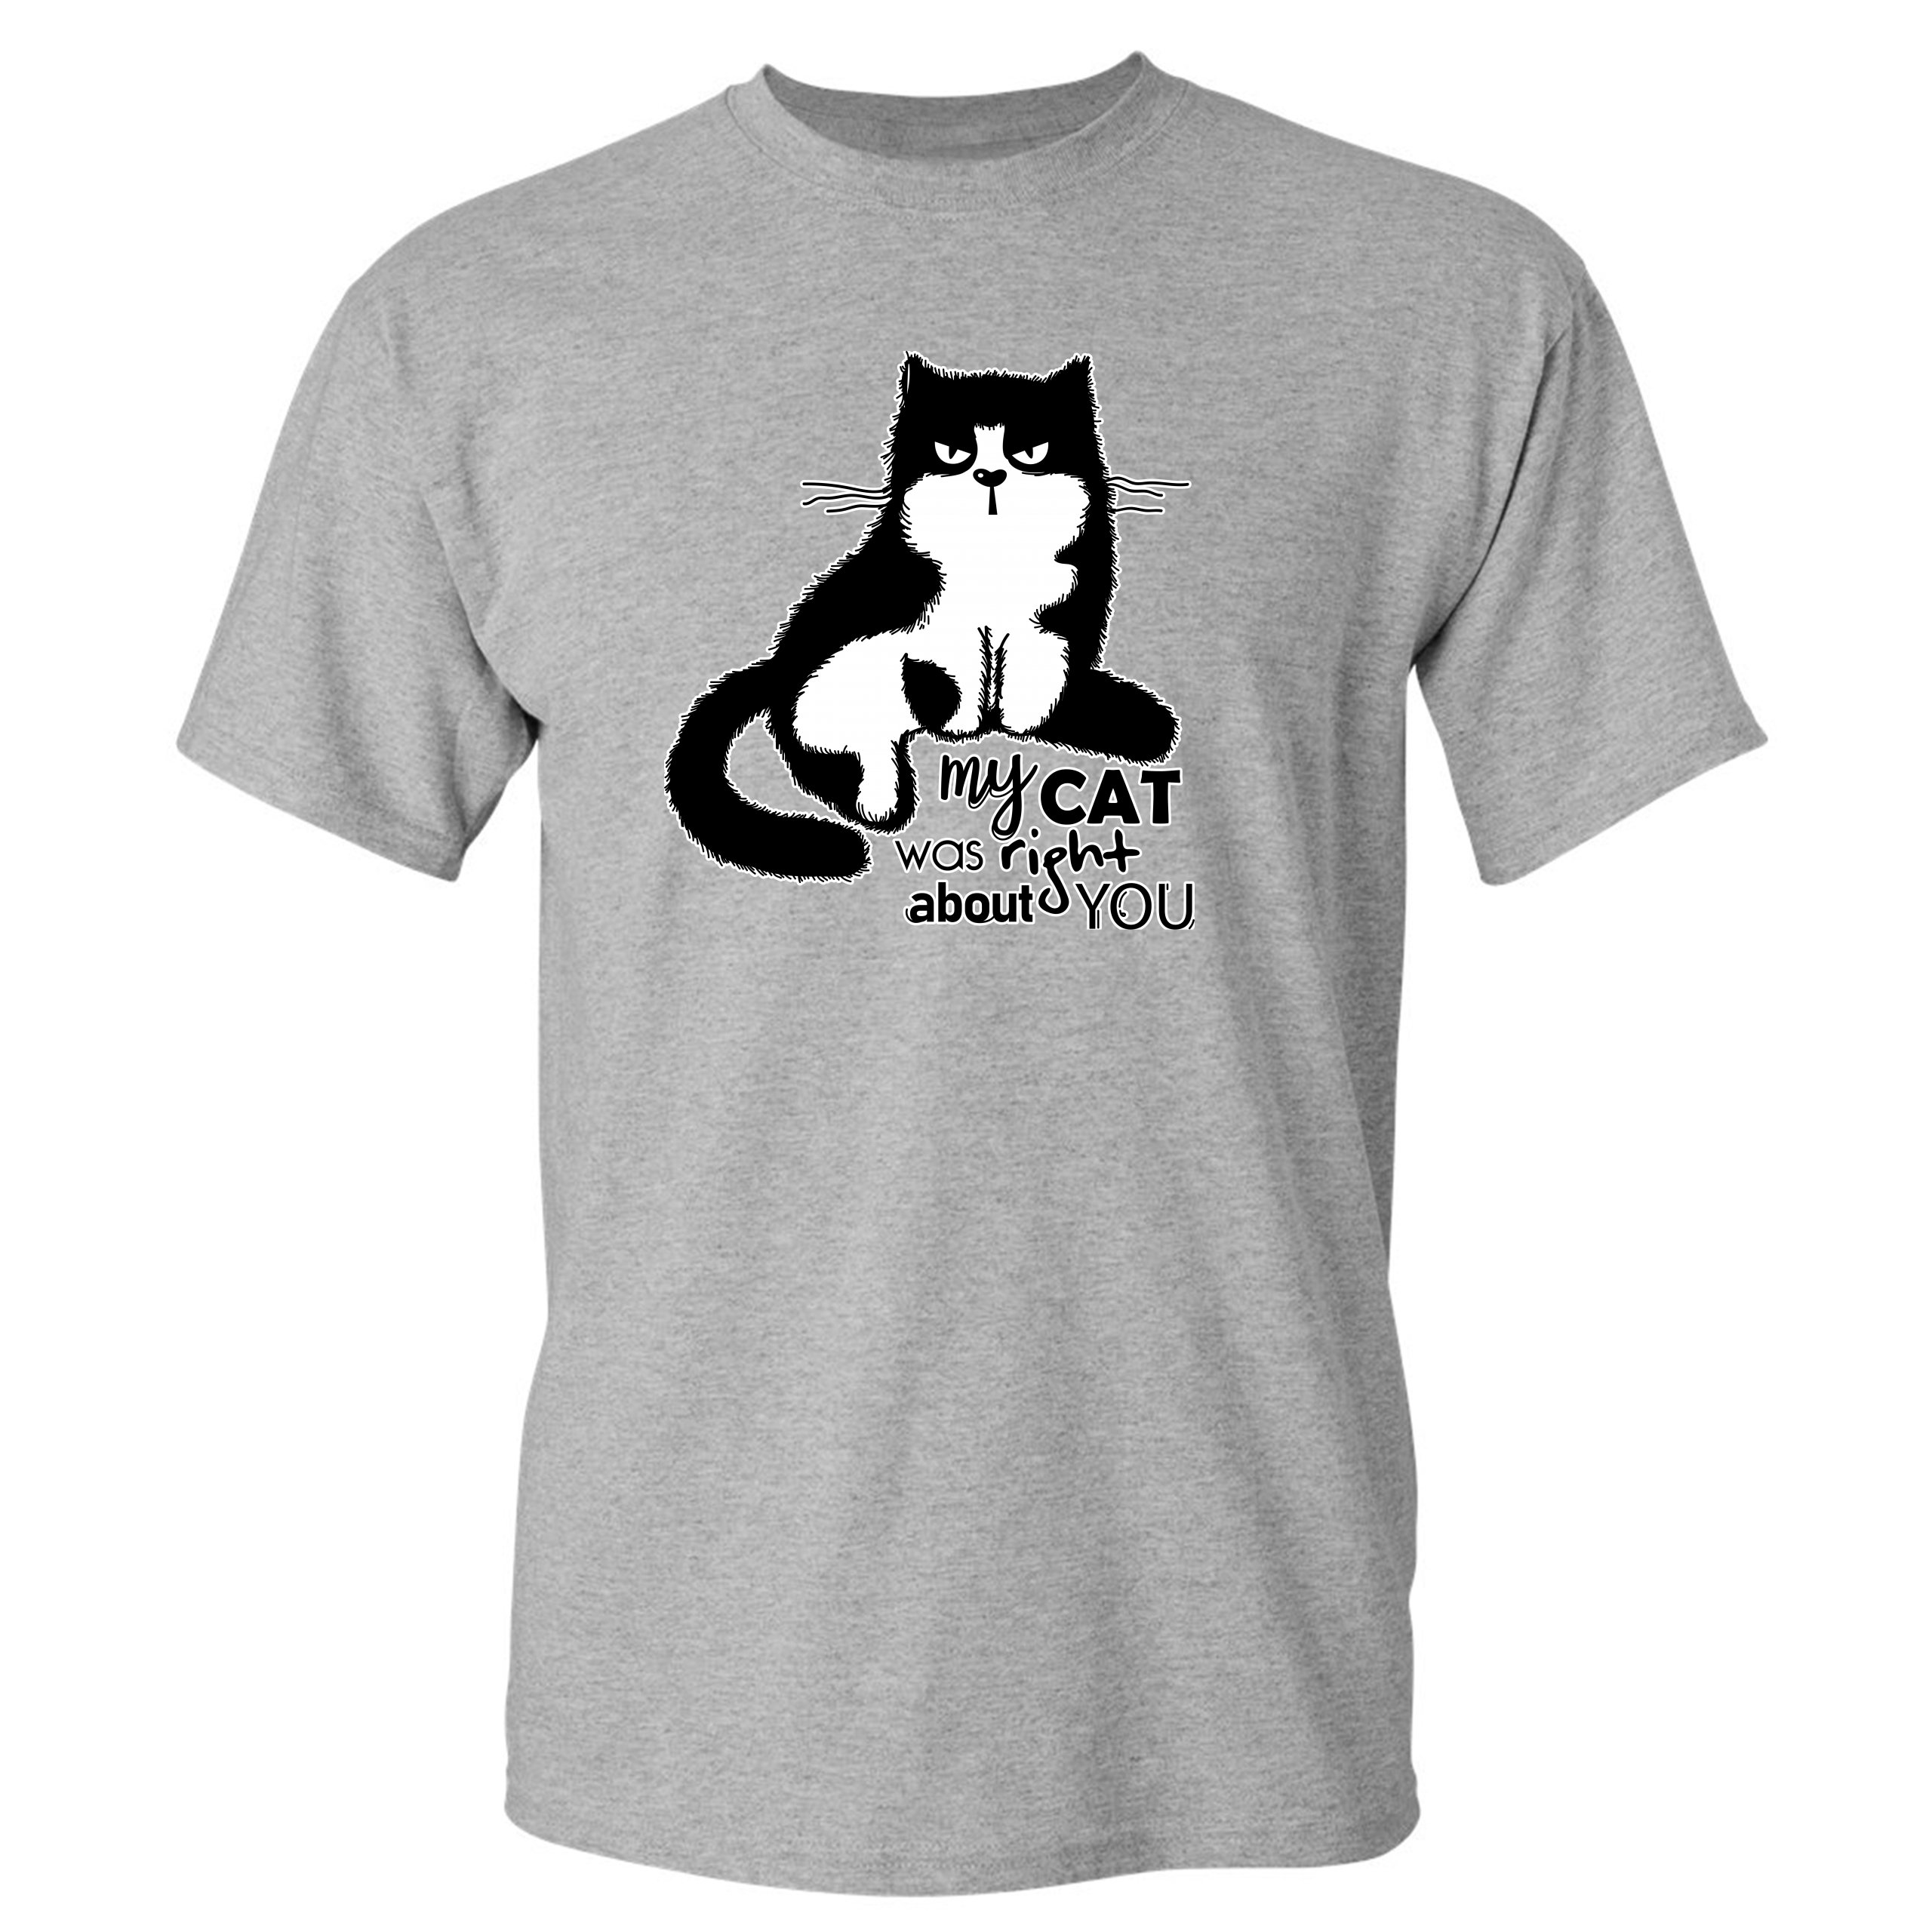 My Cat Was Right About You T-shirt Cat Lover Funny Kitty Kitten Men's Tee | eBay